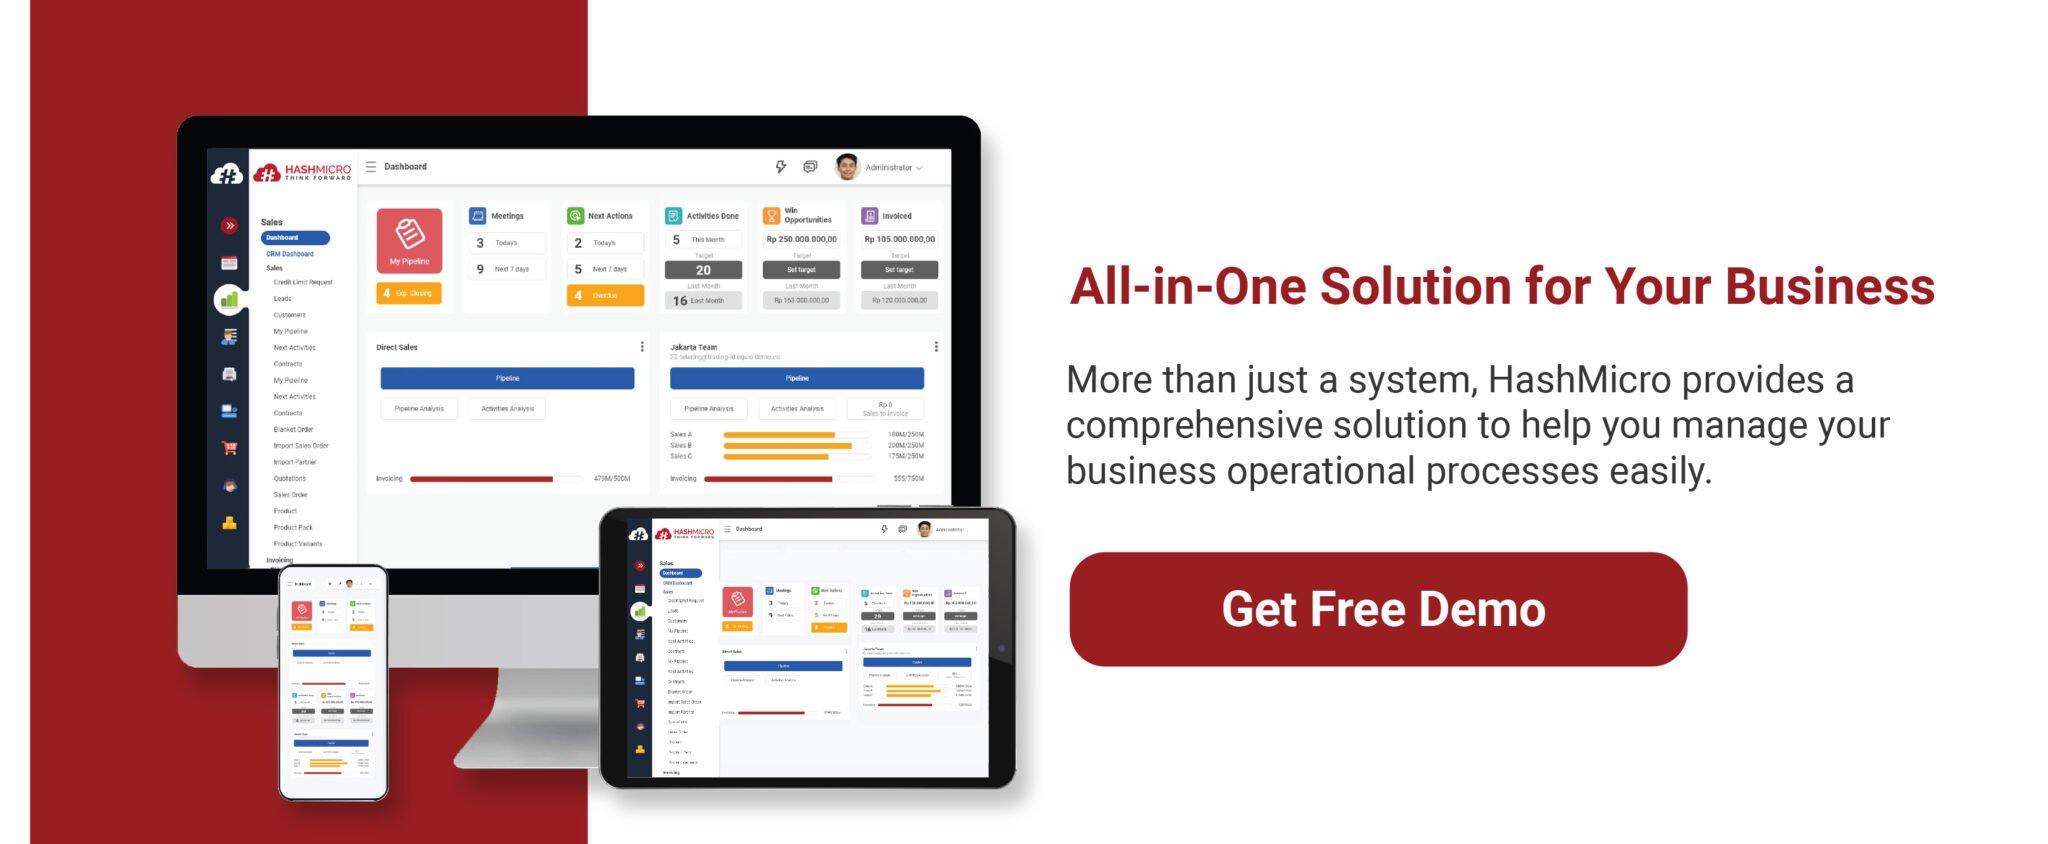 All-in-One-Solution for Your Business